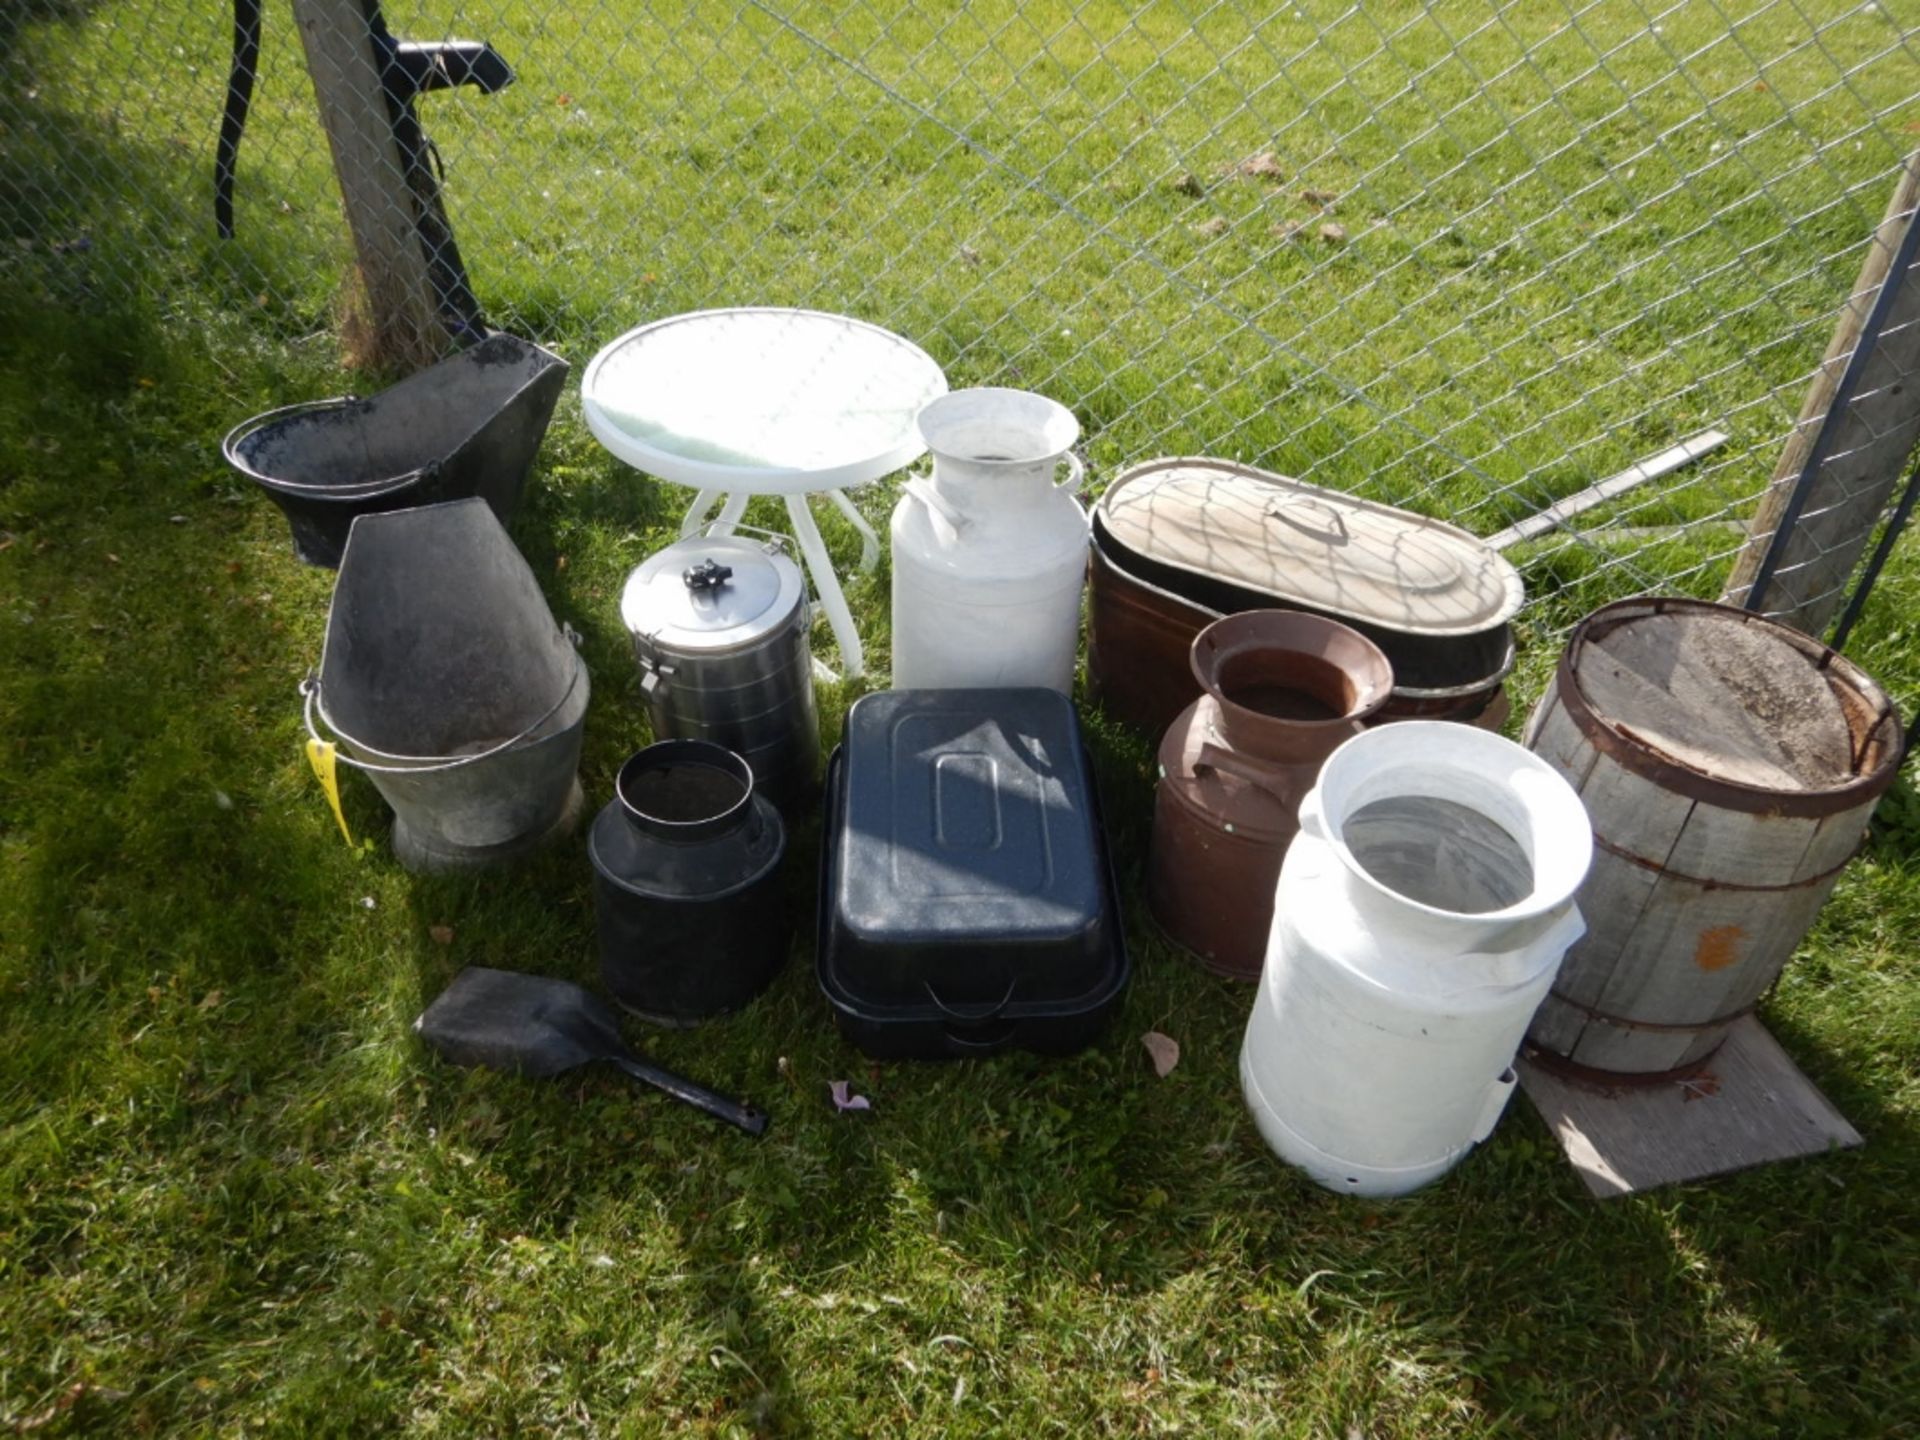 L/O ASSORTED COAL PAILS, CREAM CANS, COPPER WASH BOILER, LARGE ROASTER PAN, ETC - Image 4 of 4